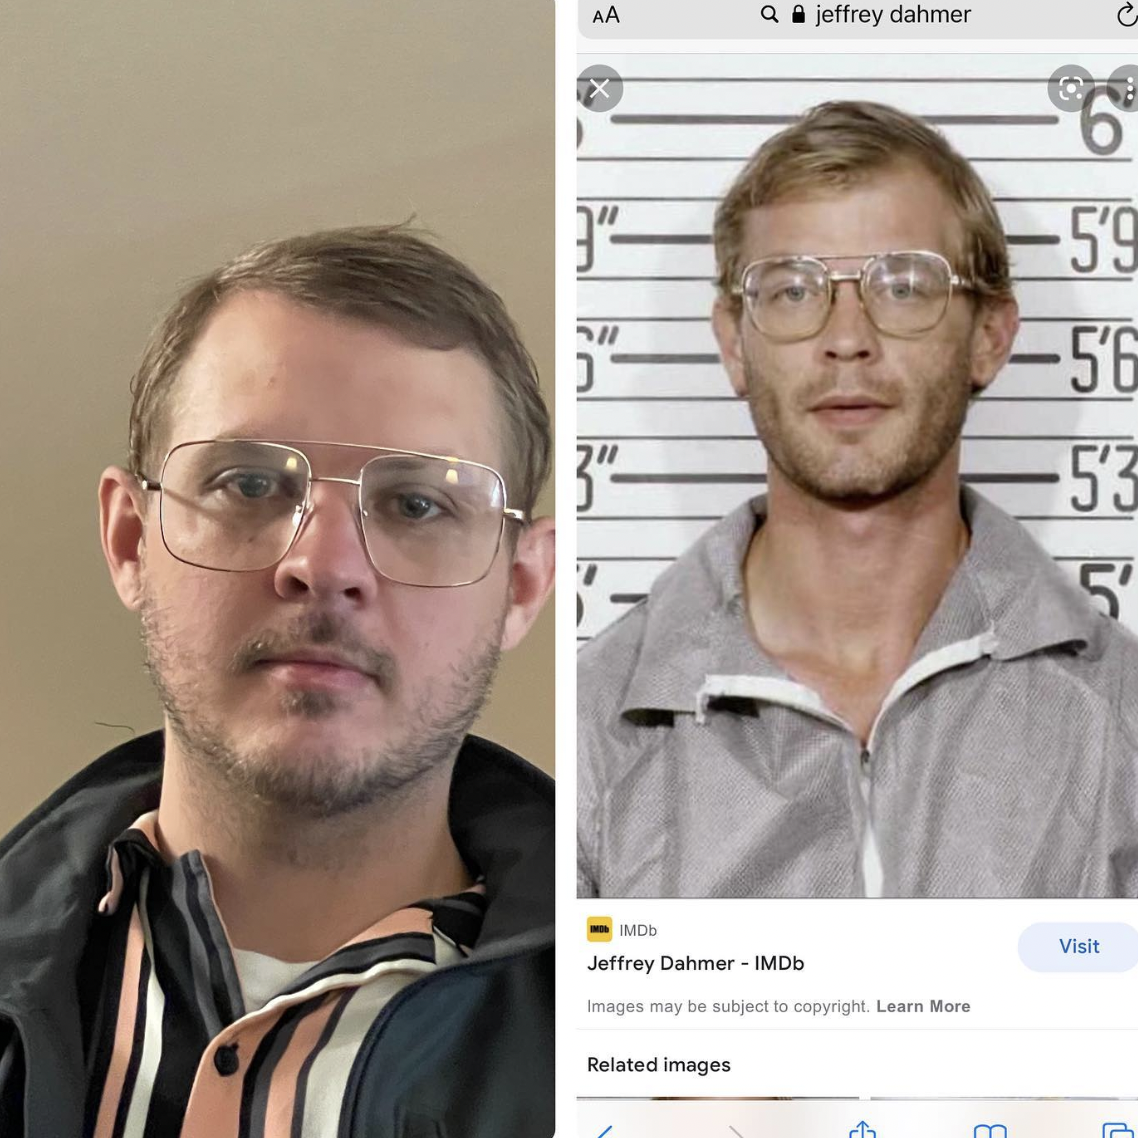 jeffrey dahmer costume - Aa jeffrey dahmer 711 MDb Jeffrey Dahmer IMDb Images may be subject to copyright. Learn More Related images m 5'9 56 53 5' Visit